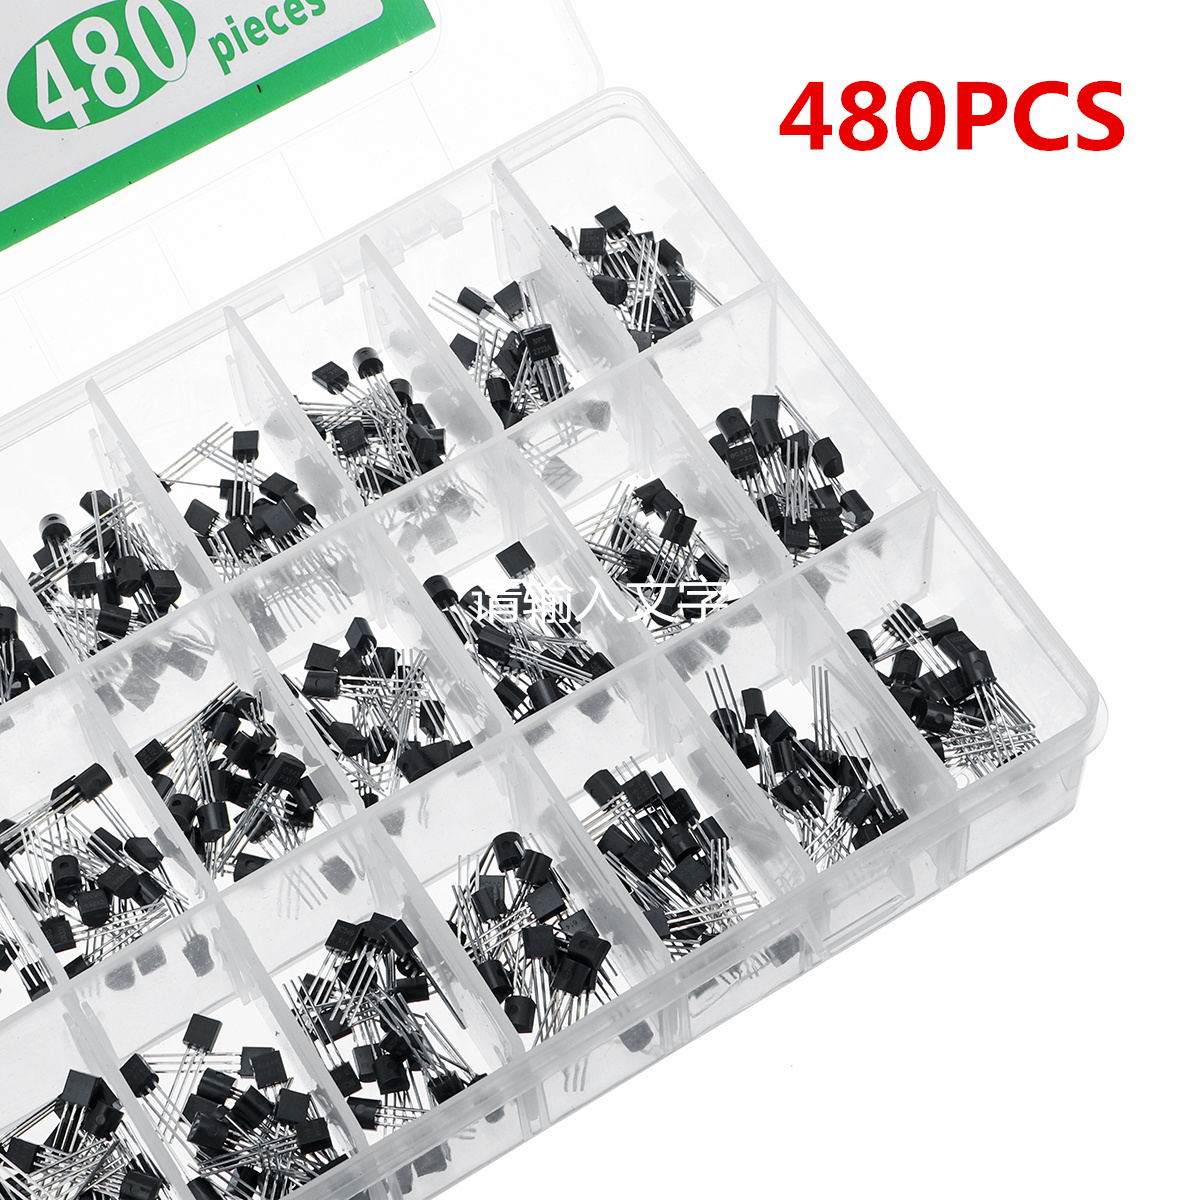 480Pcs-24-Types-Silicon-In-line-NPN--PNP-Transistor-Assortment-Kit-Pack-2N2222-1681210-2